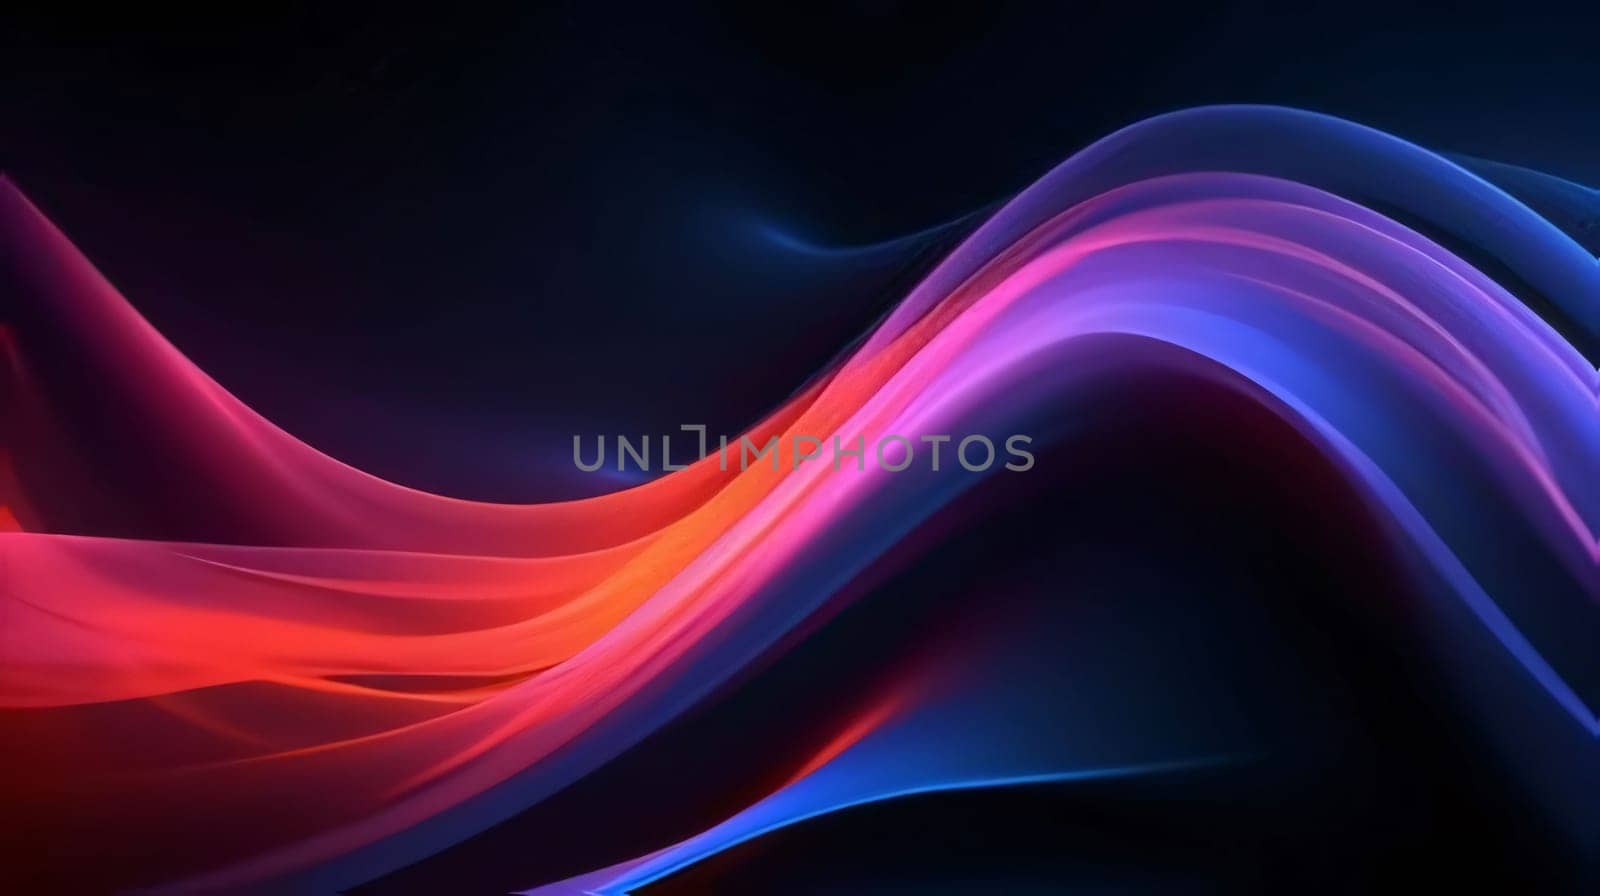 Abstract background design: abstract background with smooth lines in blue, red and black colors